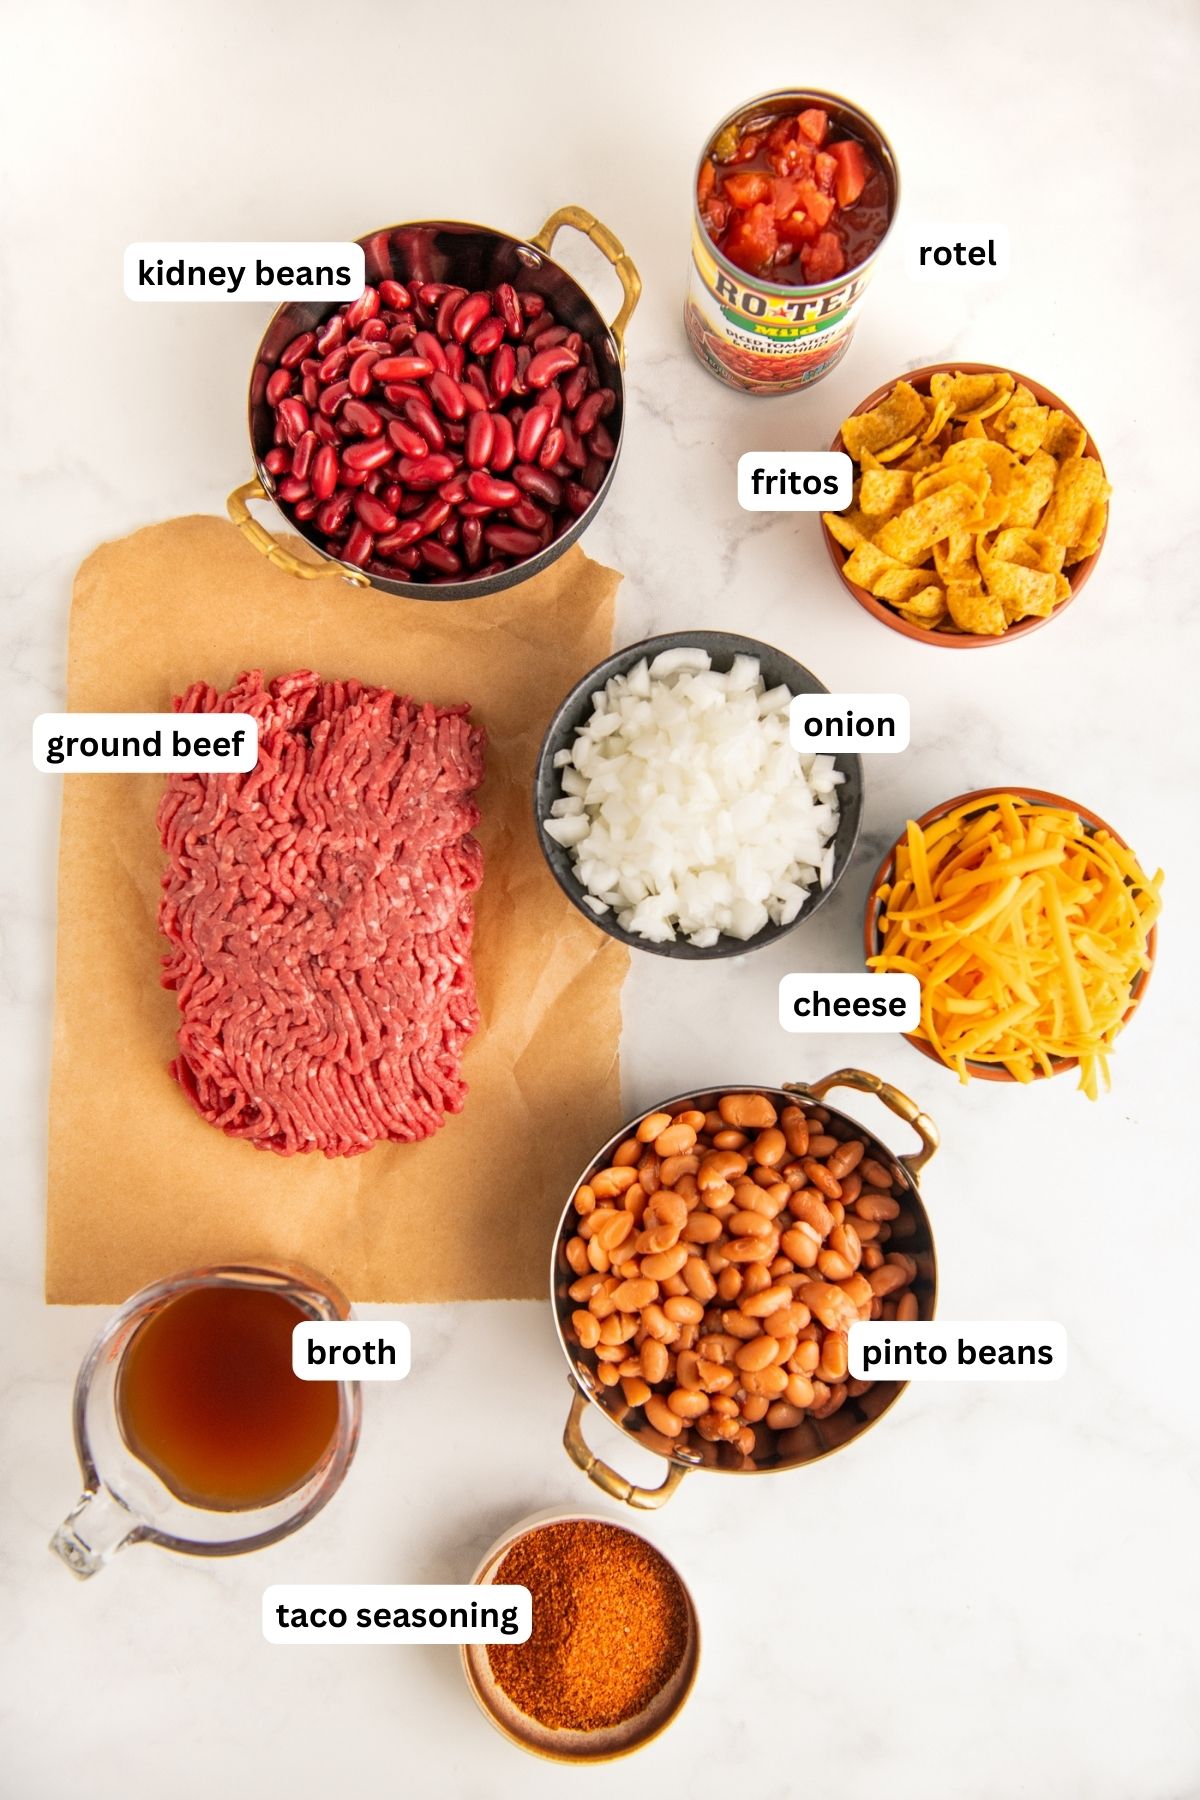 Ingredients to make Frito recipe arranged in bowls. From top to bottom: rotel, kidney beans, fritos, ground beef, onion, cheese, pinto beans, broth and taco seasoning.